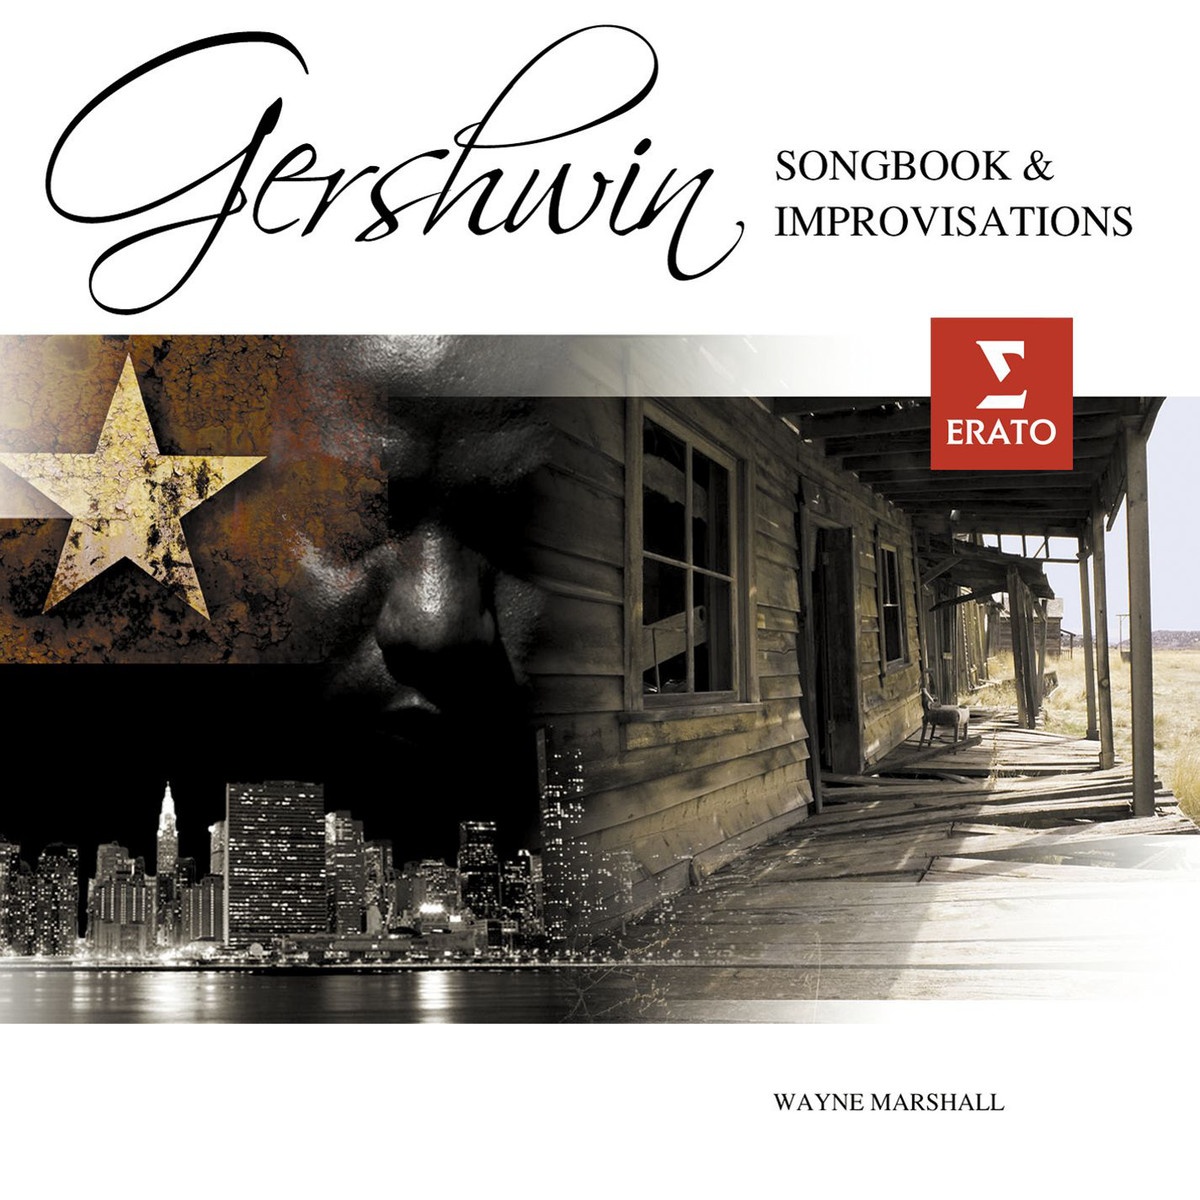 A Gershwin Songbook: improvisations on songs by George Gershwin: Someone to watch over me (Oh! Kay)